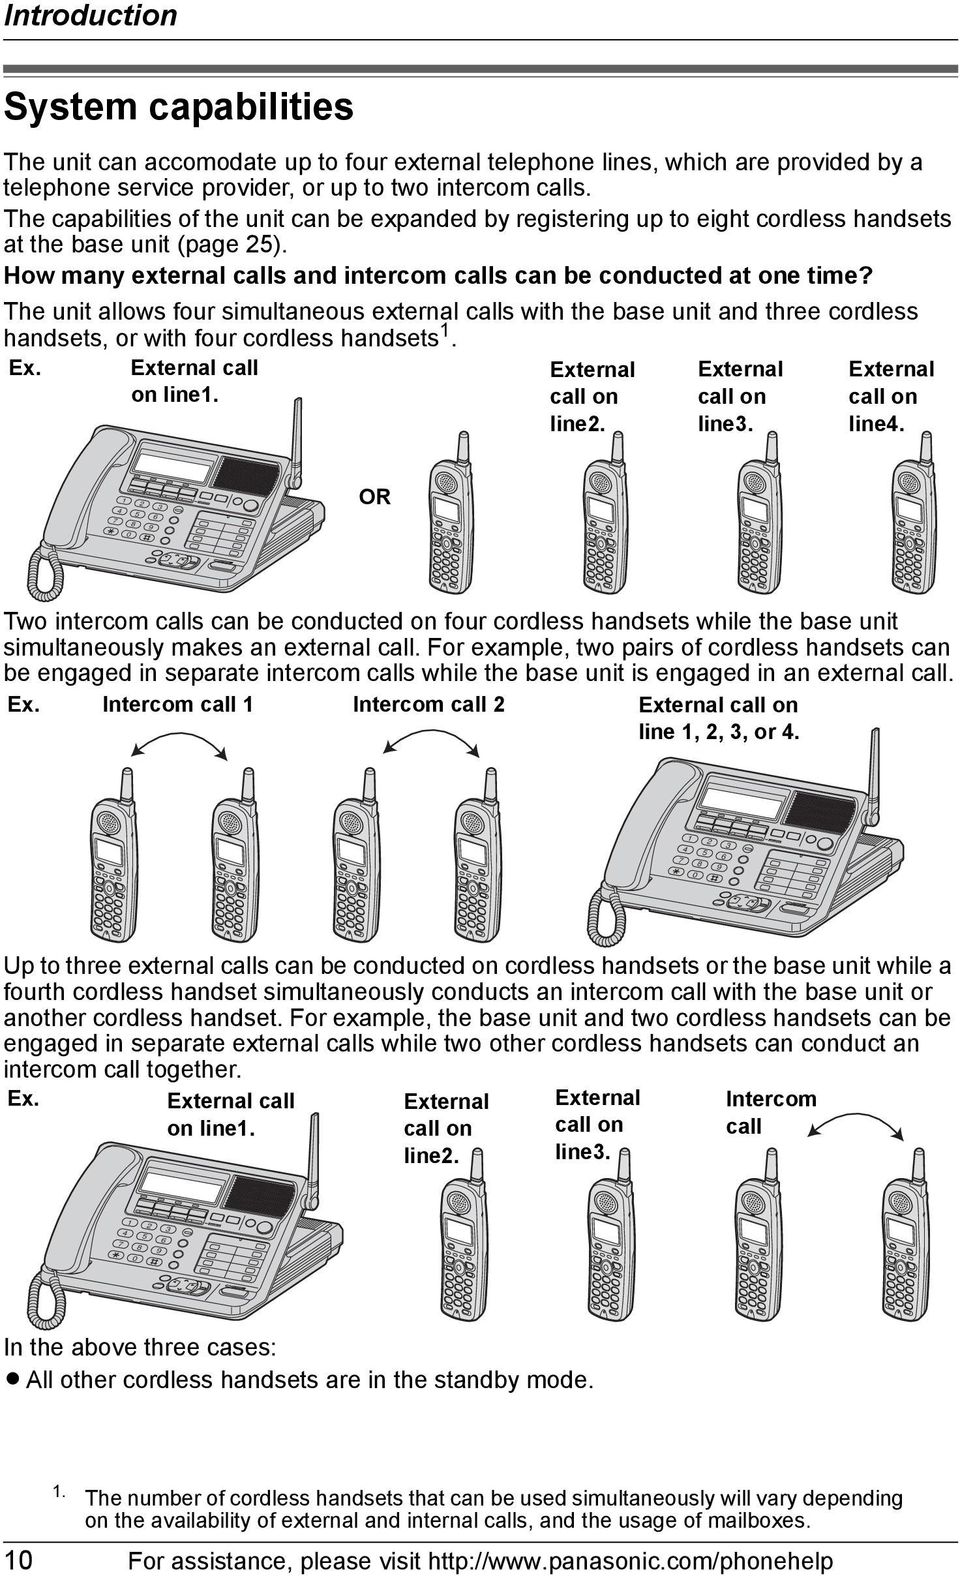 How many external calls and intercom calls can be conducted at one time?